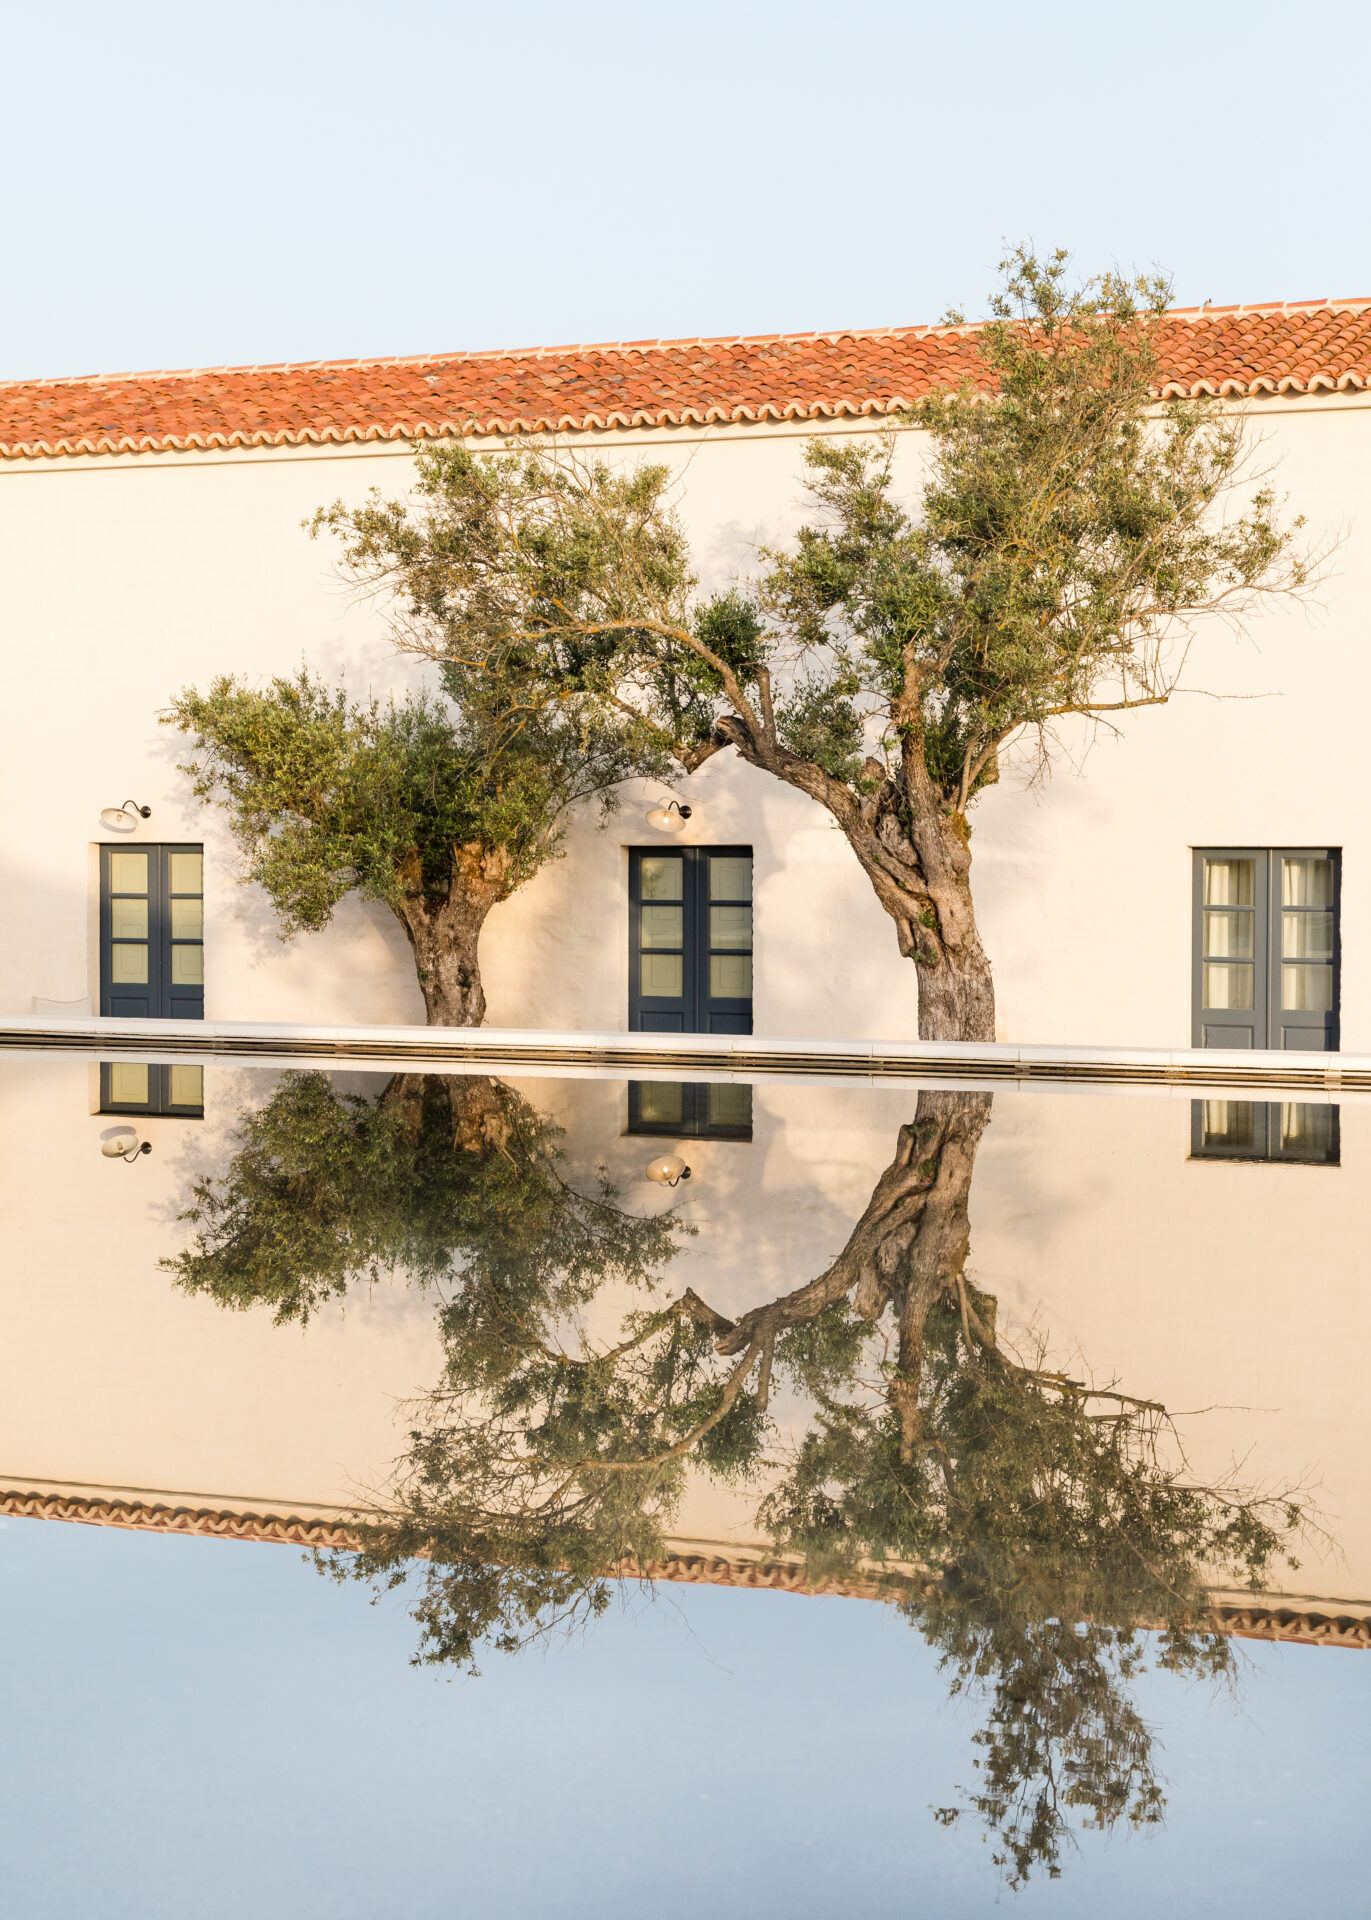 São Lourenço do Barrocal | two trees mirrored by the reflection of the water in Portugal